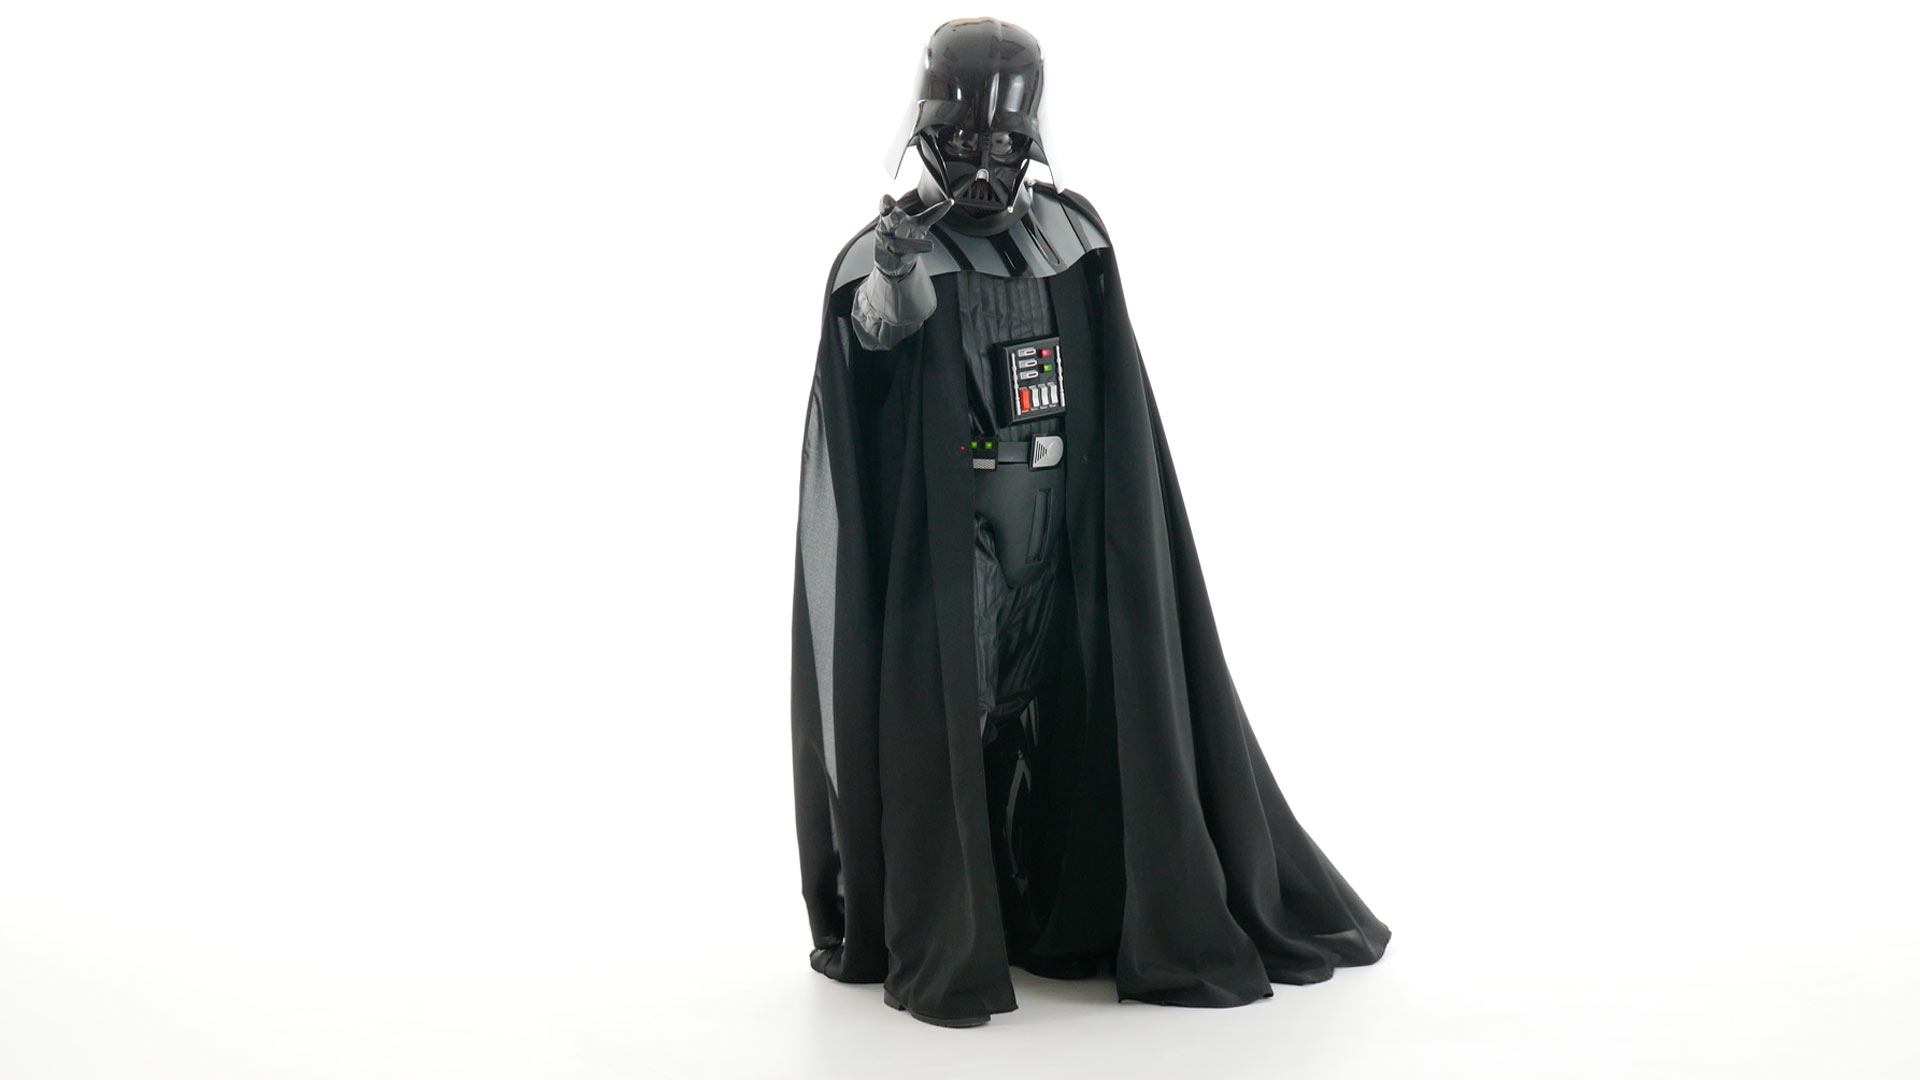 This authentic Darth Vader costume is replica from the Star Wars movies.  This high end costume is a must for Star Wars fans and costume enthusiasts alike.